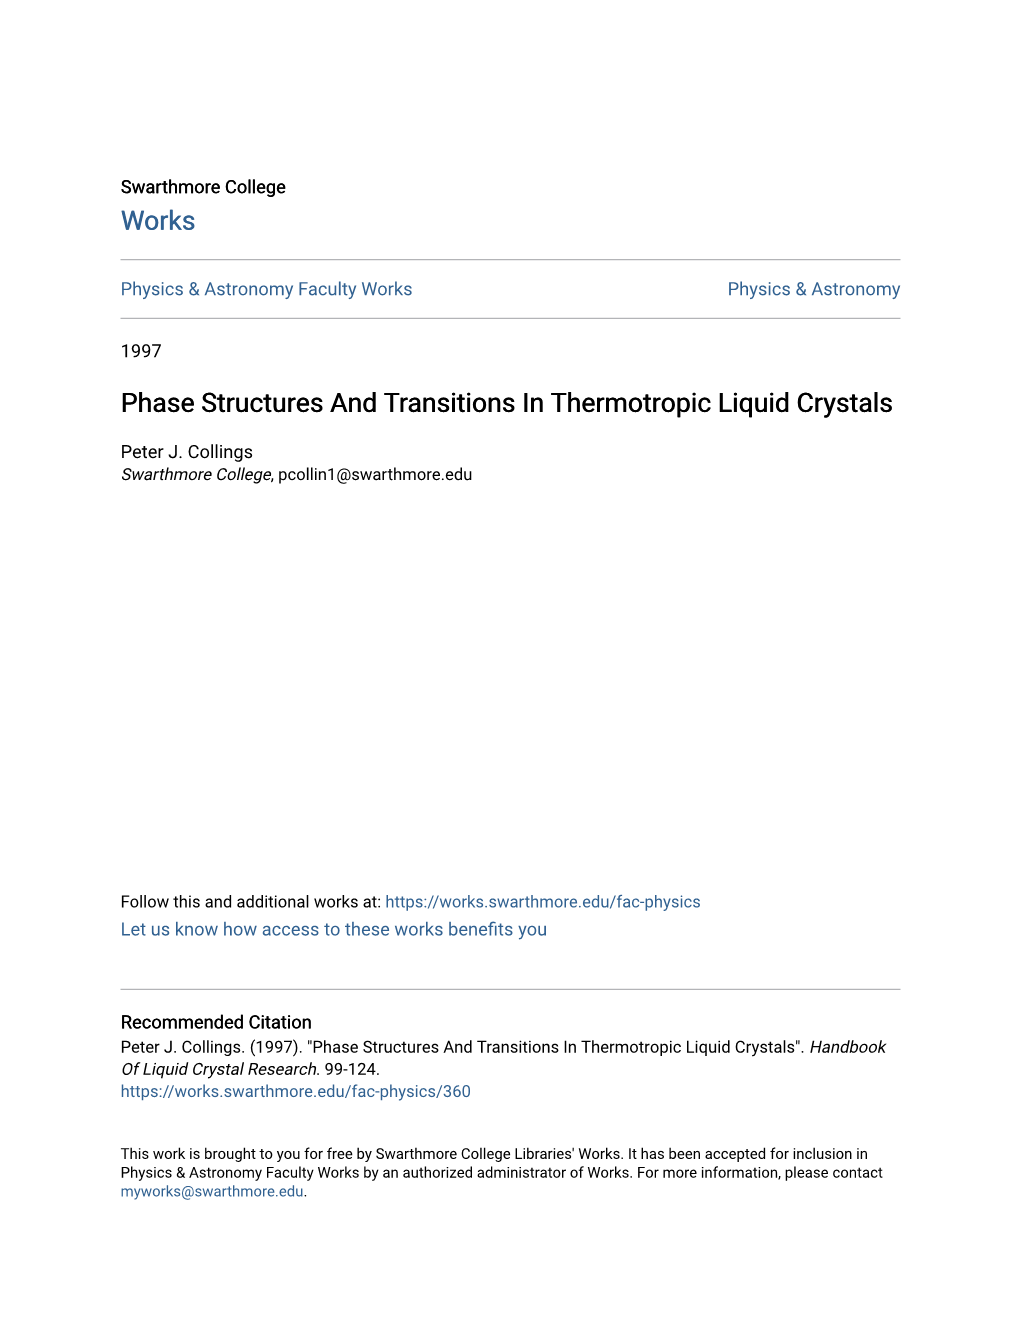 Phase Structures and Transitions in Thermotropic Liquid Crystals